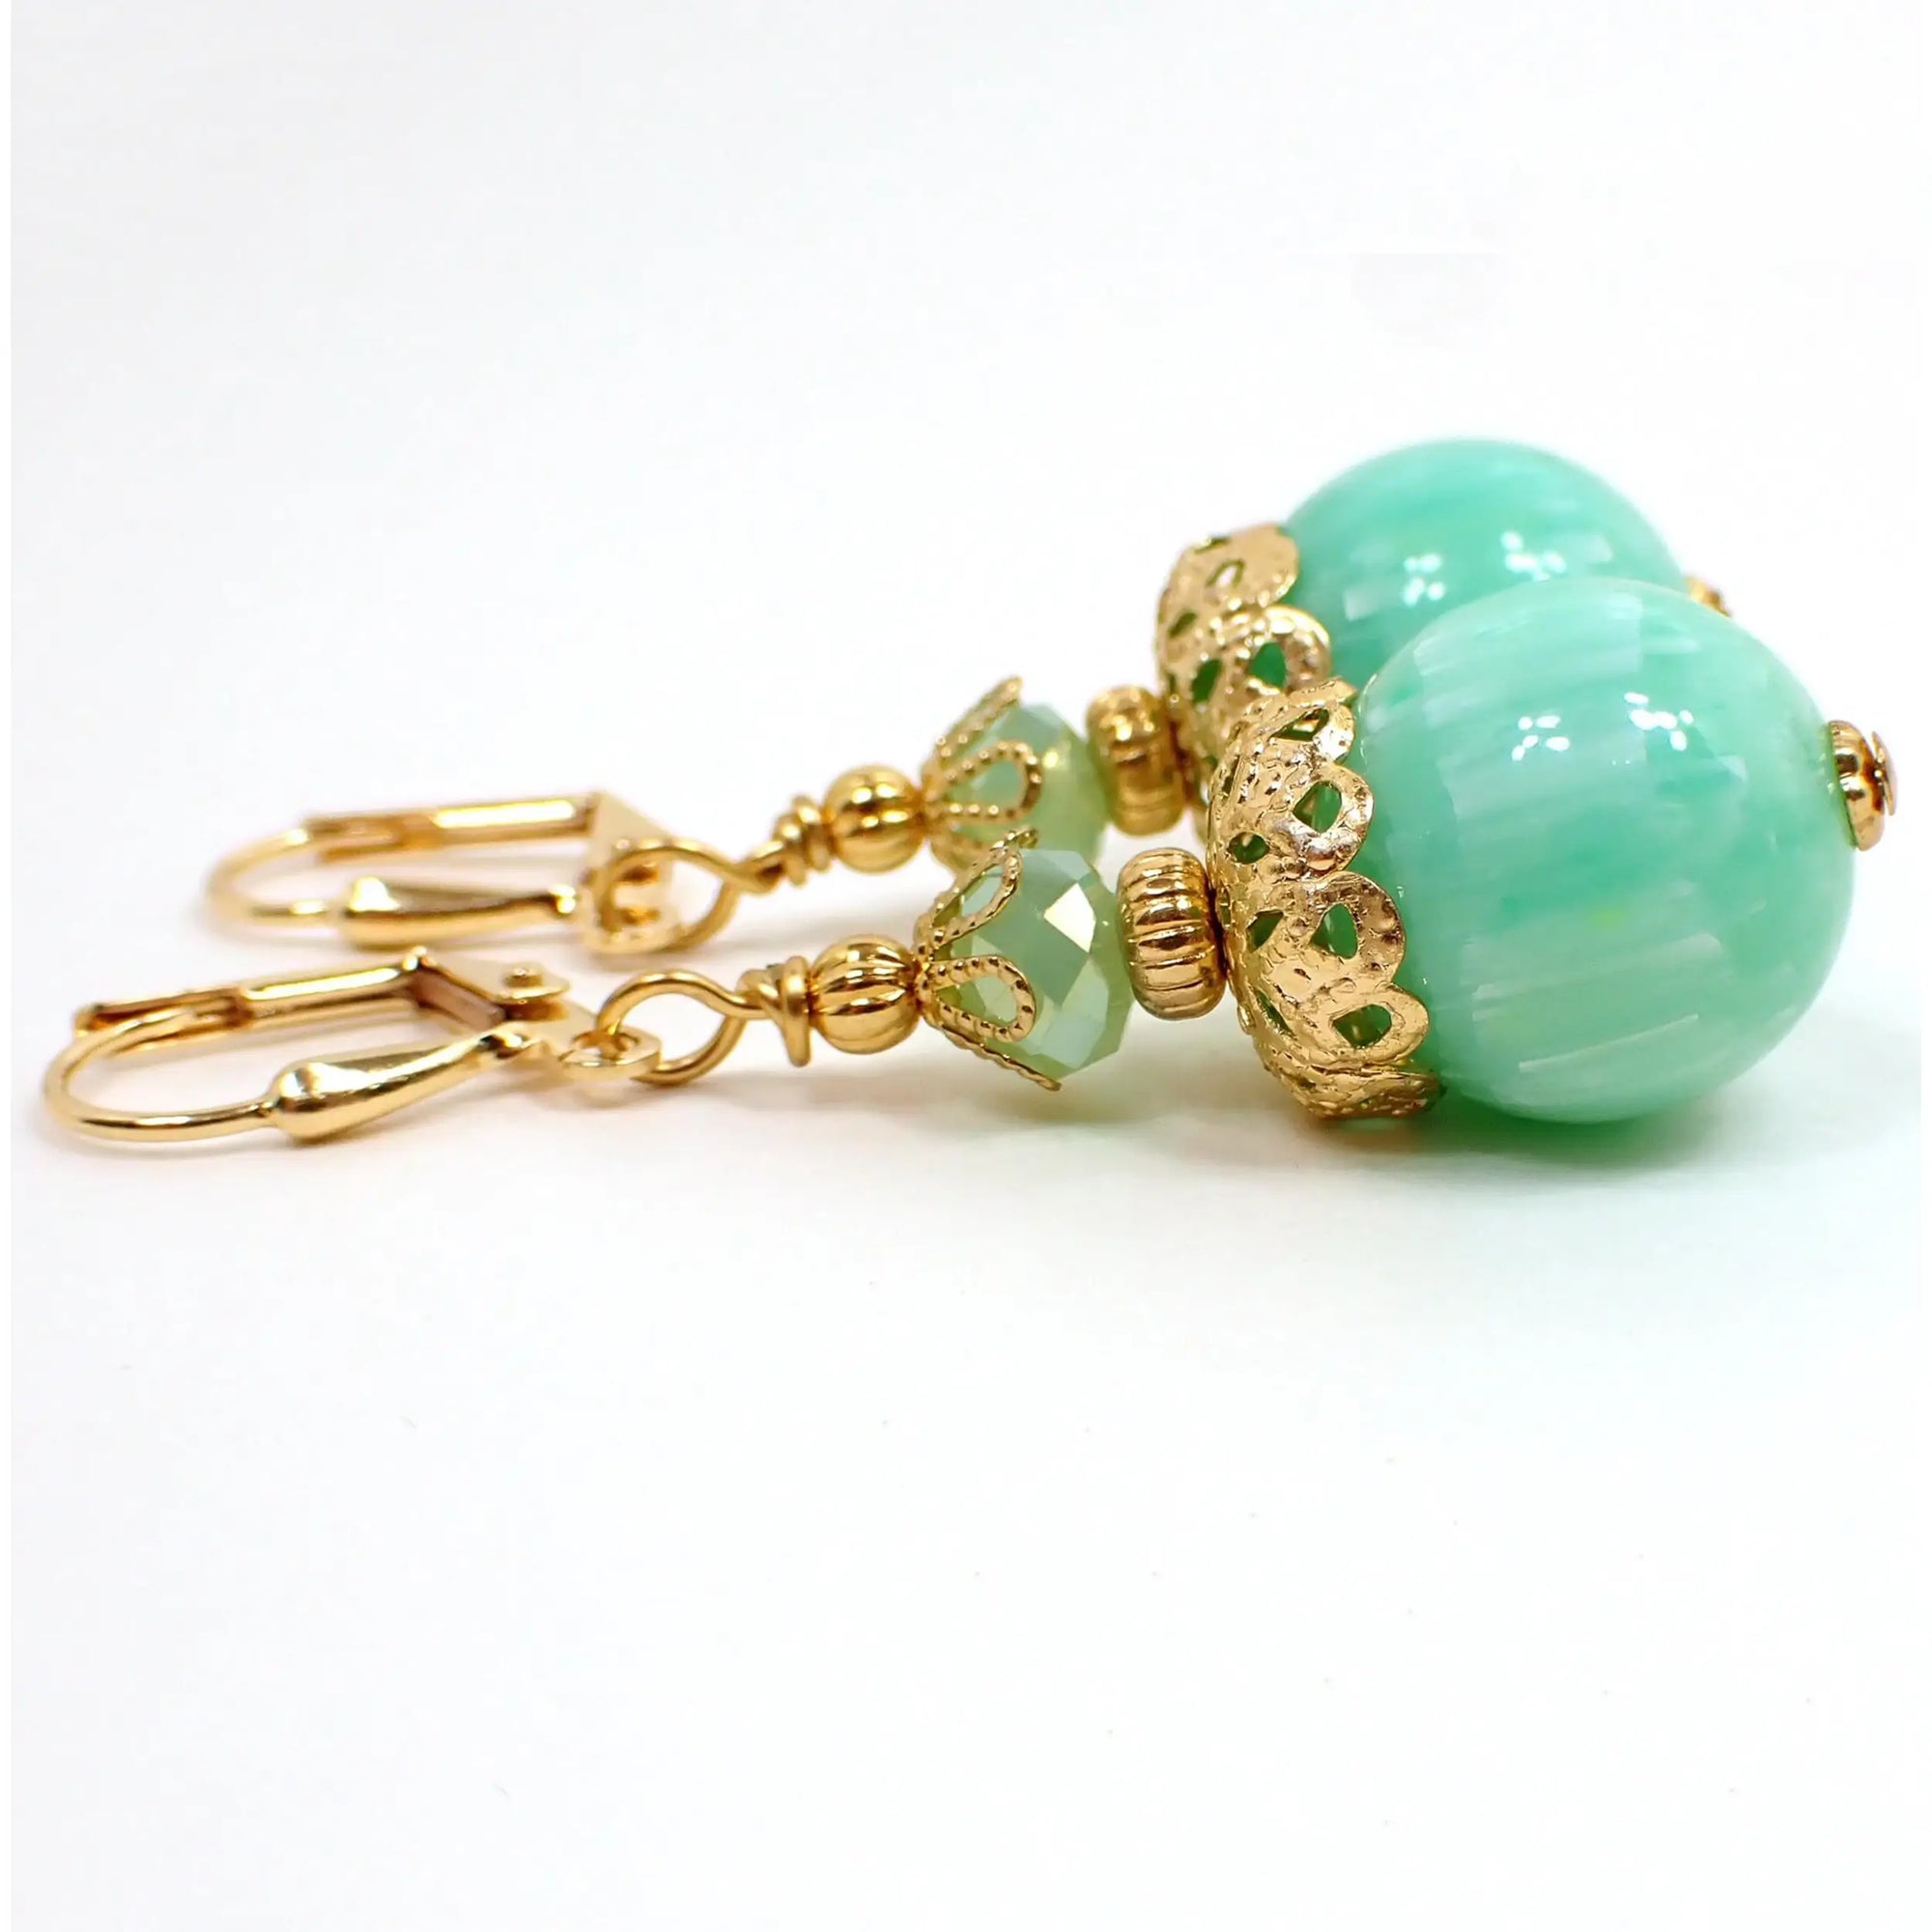 Side view of the handmade lucite drop earrings. The metal is gold plated in color. There are new faceted glass crystal beads in a light mint green color at the top. The bottom beads are vintage lucite and are round in sea foam green with thin white stripe pattern.